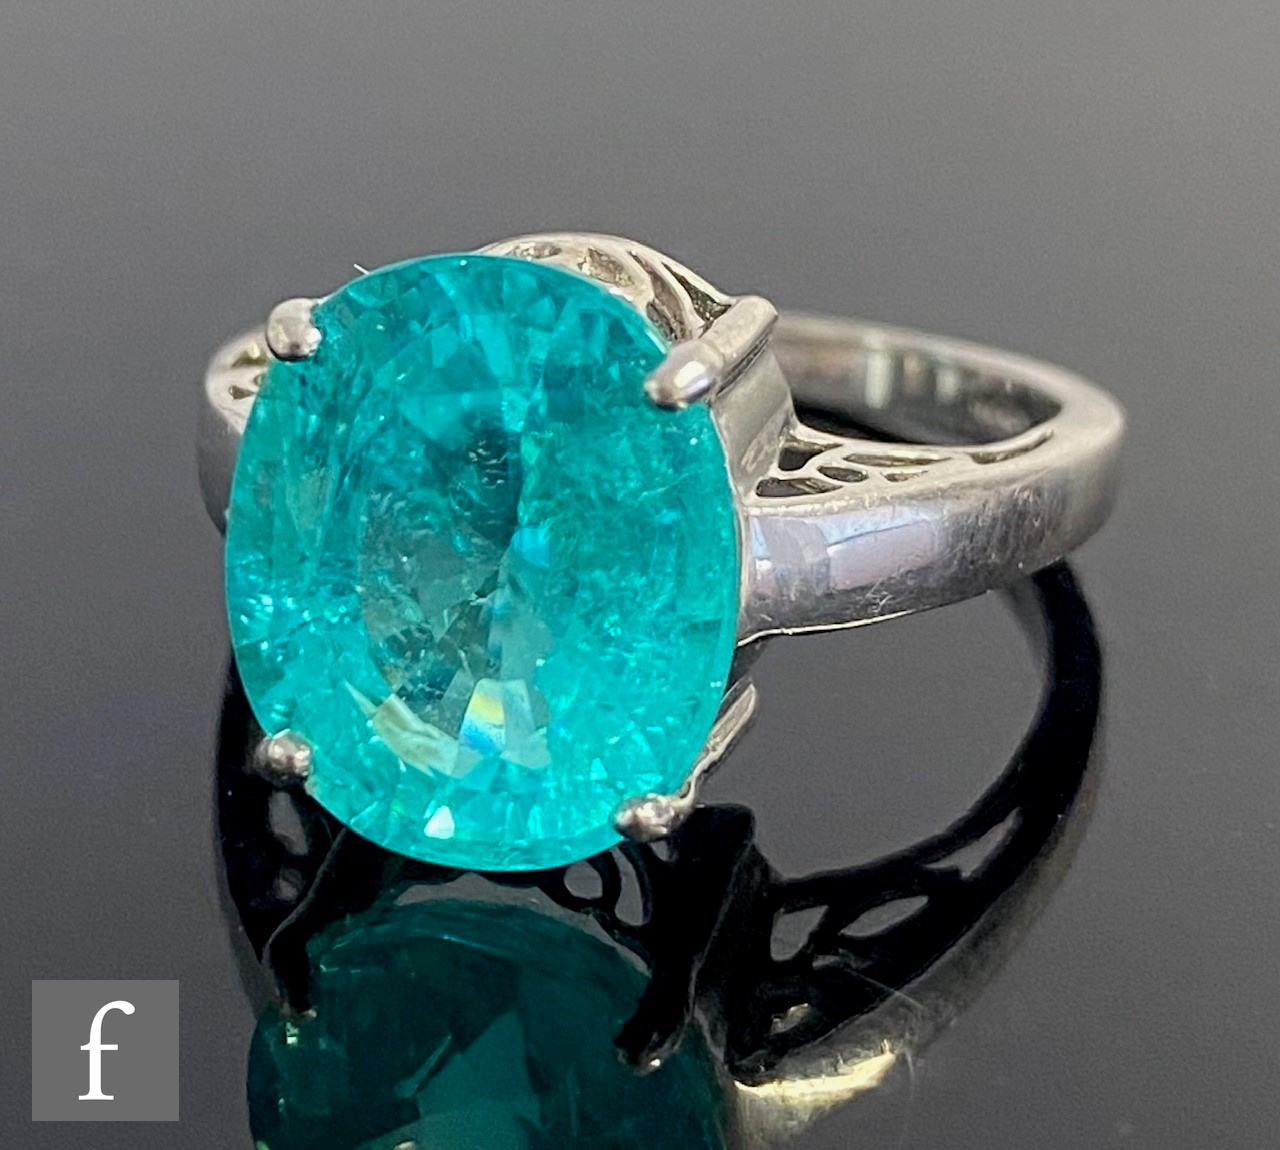 An 18ct white gold single stone, claw set paraiba tourmaline, weight approximately 6.78ct, to